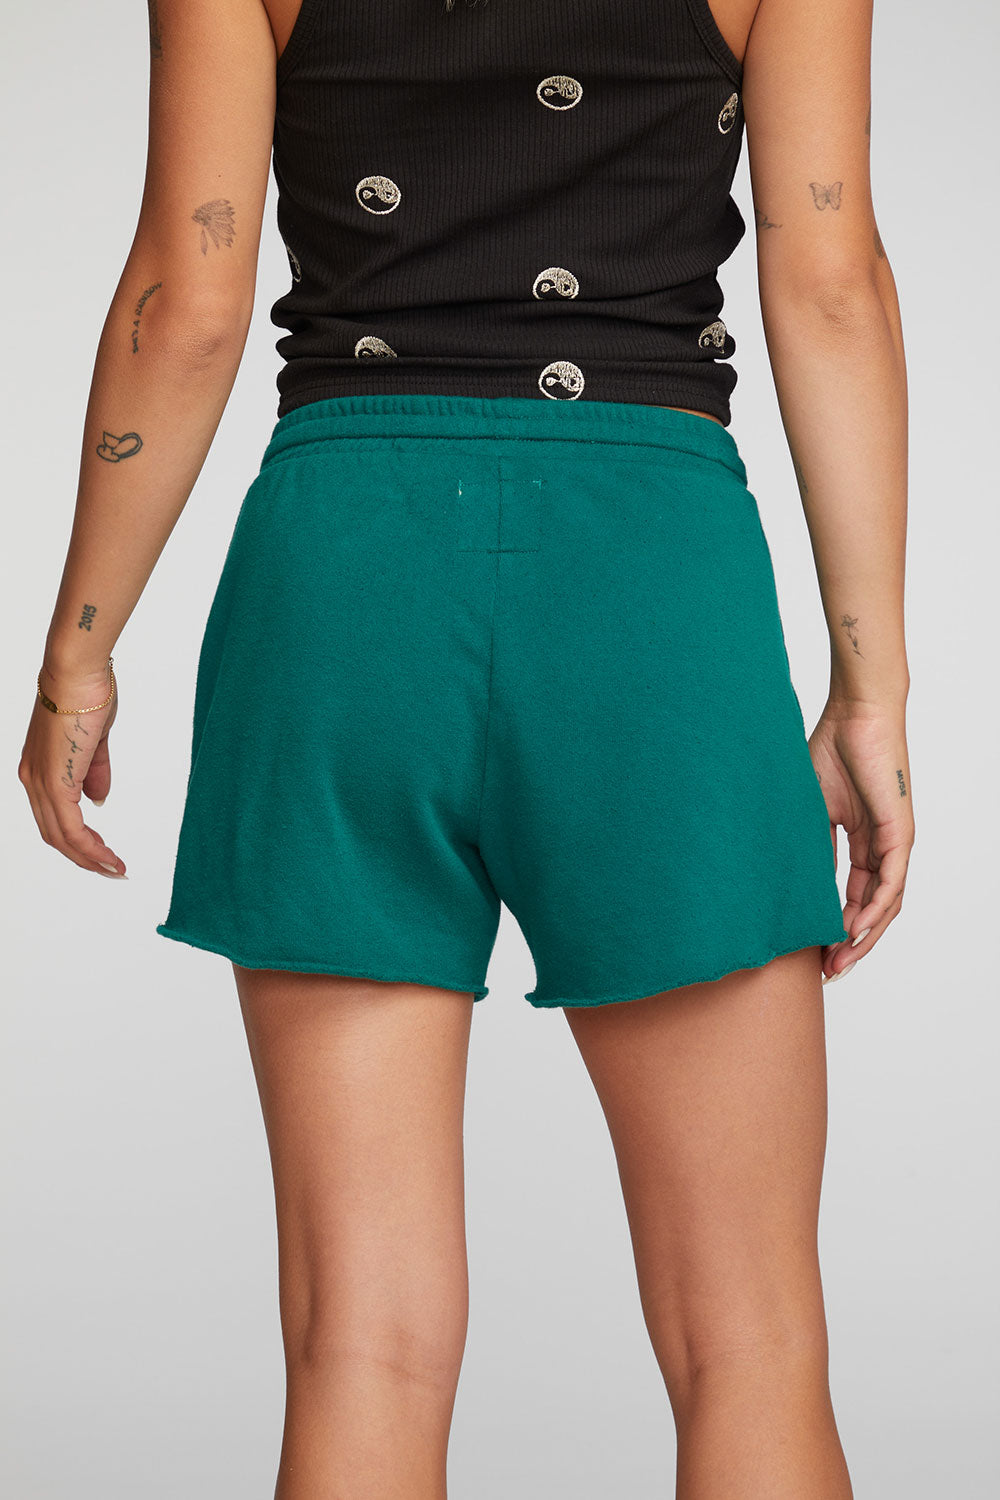 Cotton Fleece Shorts with Shoestring Tie Womens chaserbrand